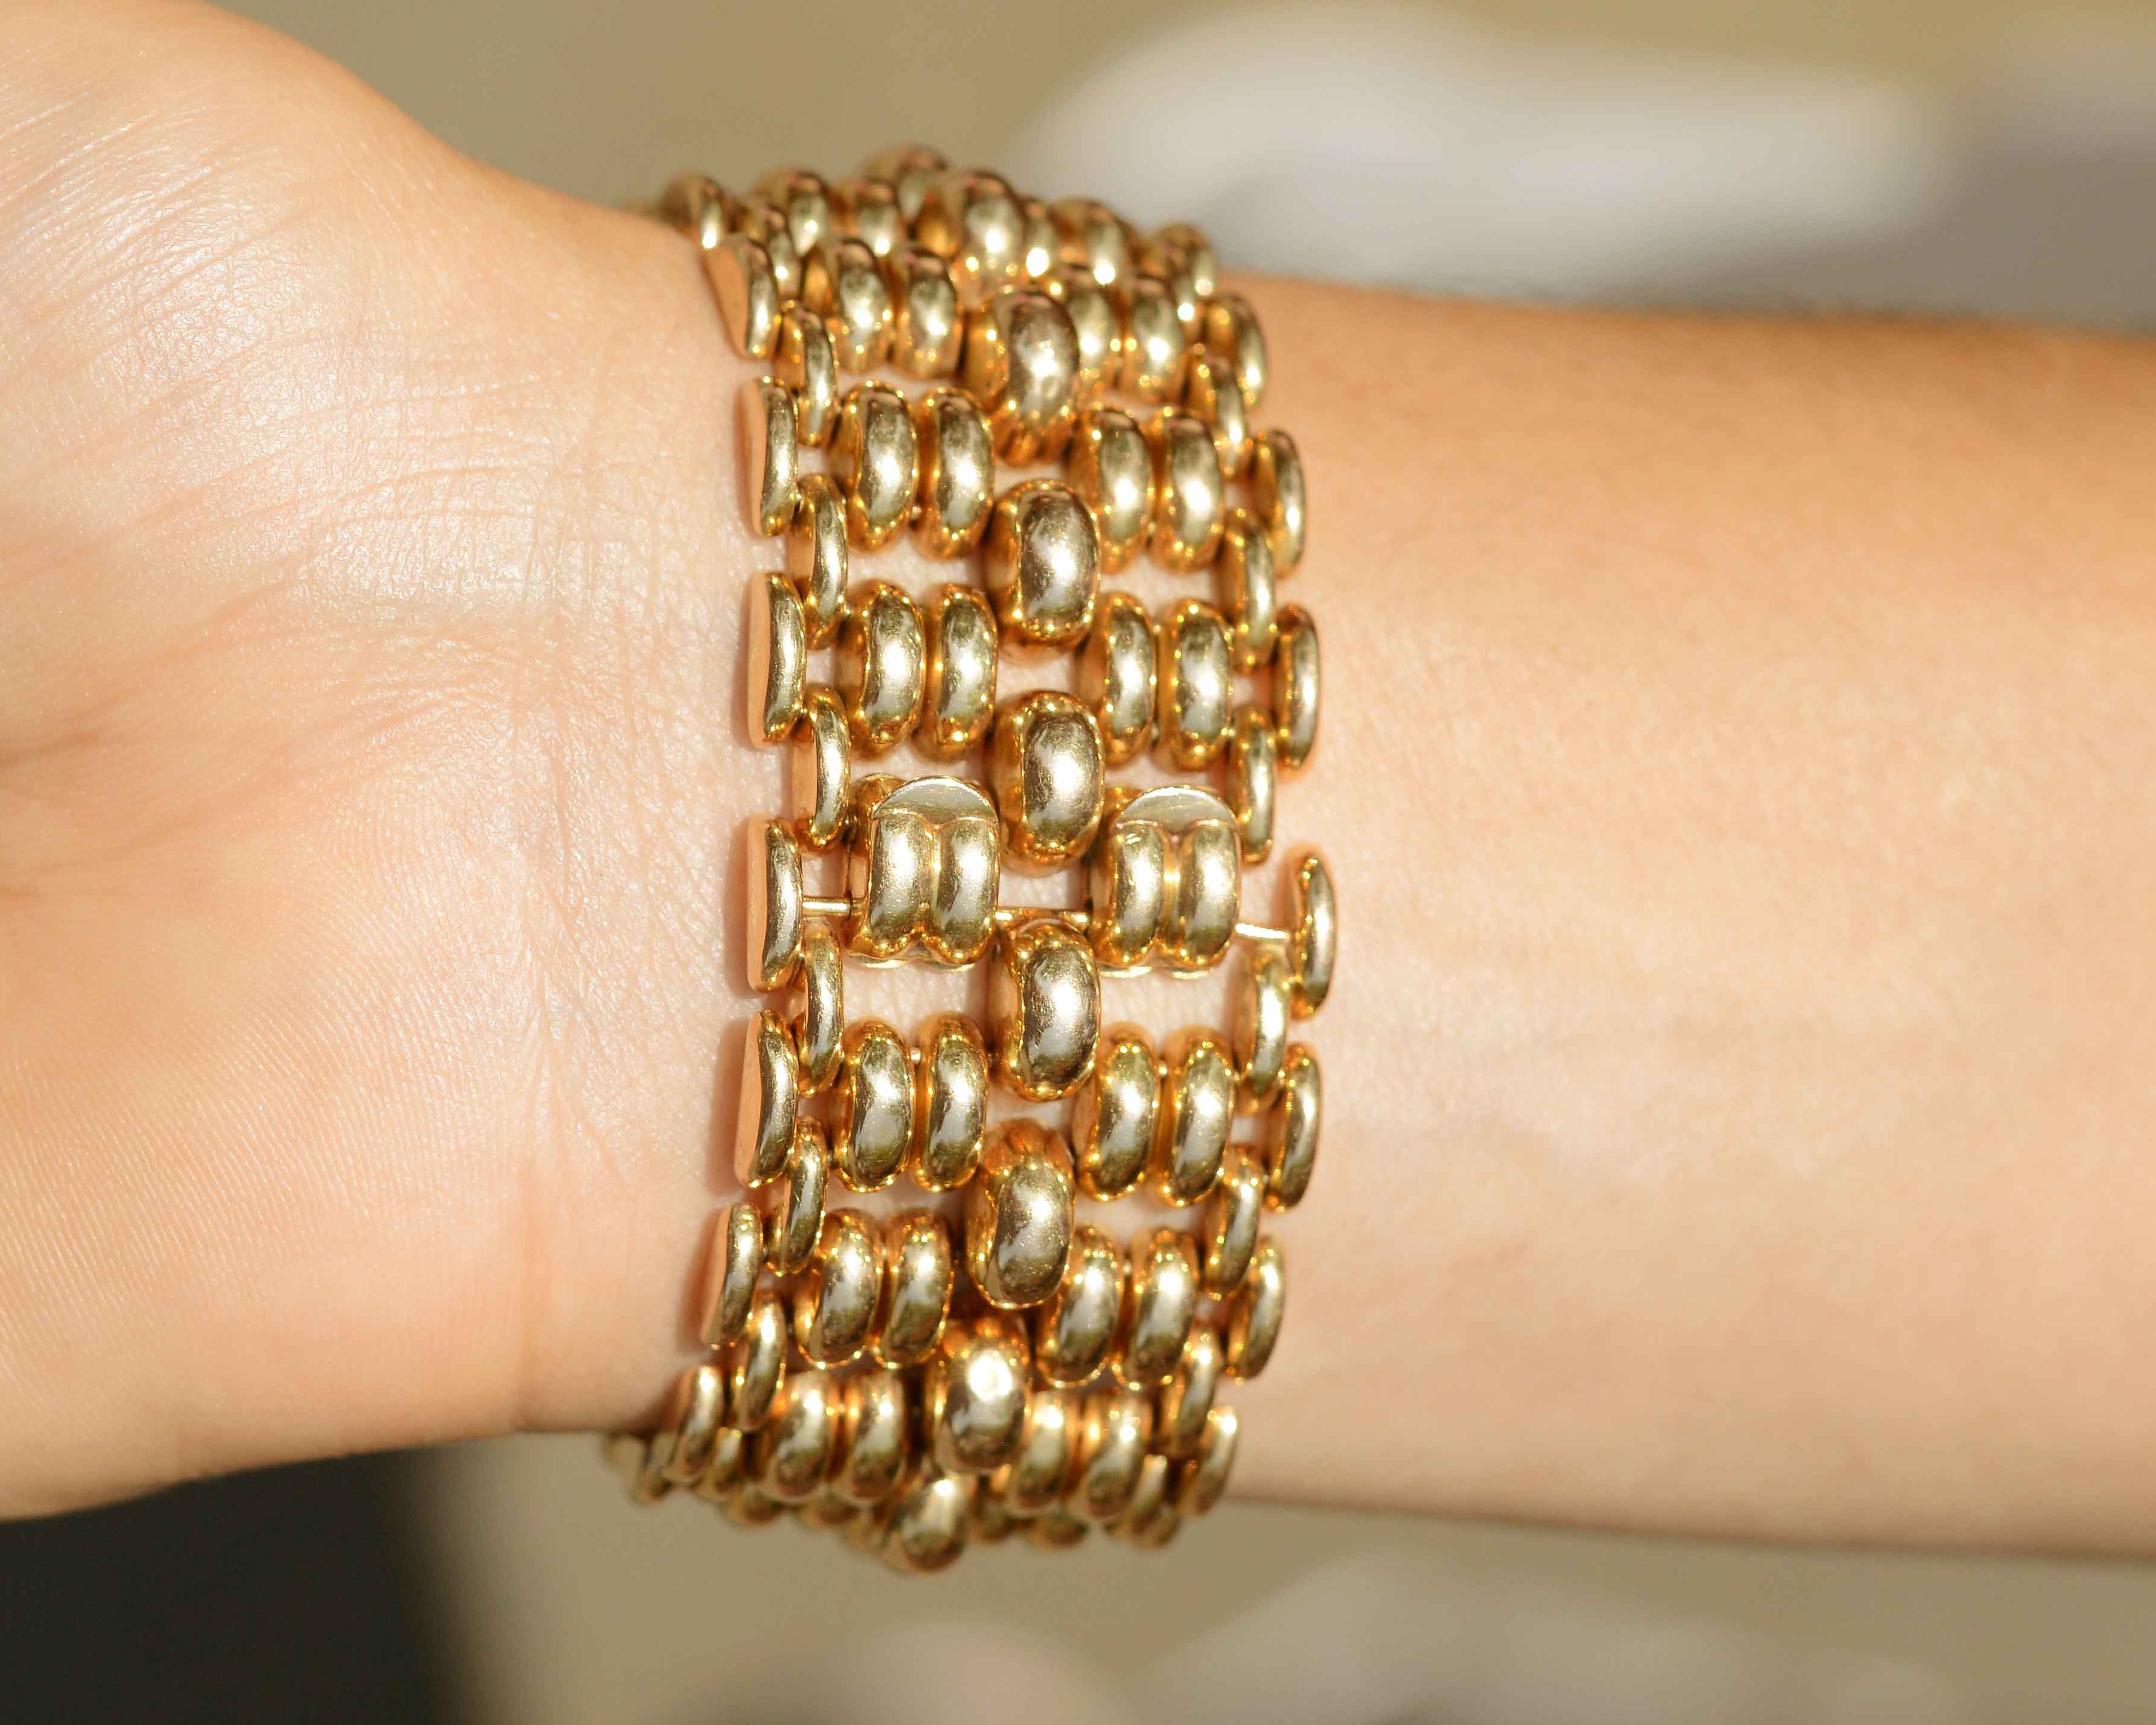 3 ounces of 18k rose gold is used in this retro bracelet.